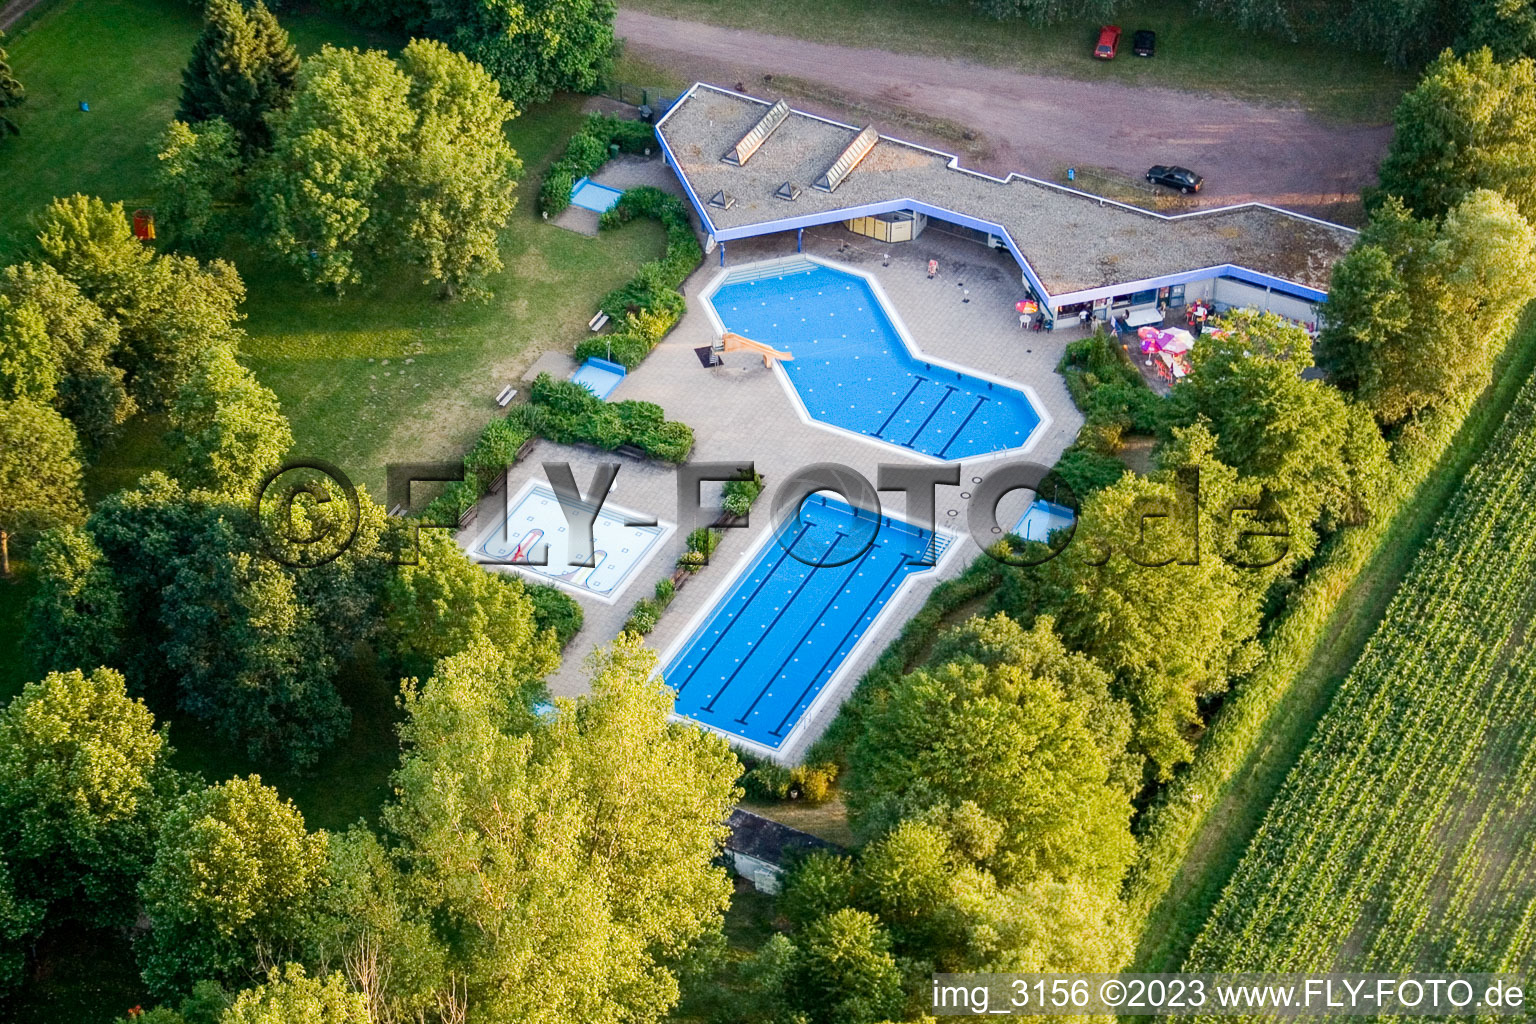 Aerial photograpy of Outdoor pool in Steinfeld in the state Rhineland-Palatinate, Germany